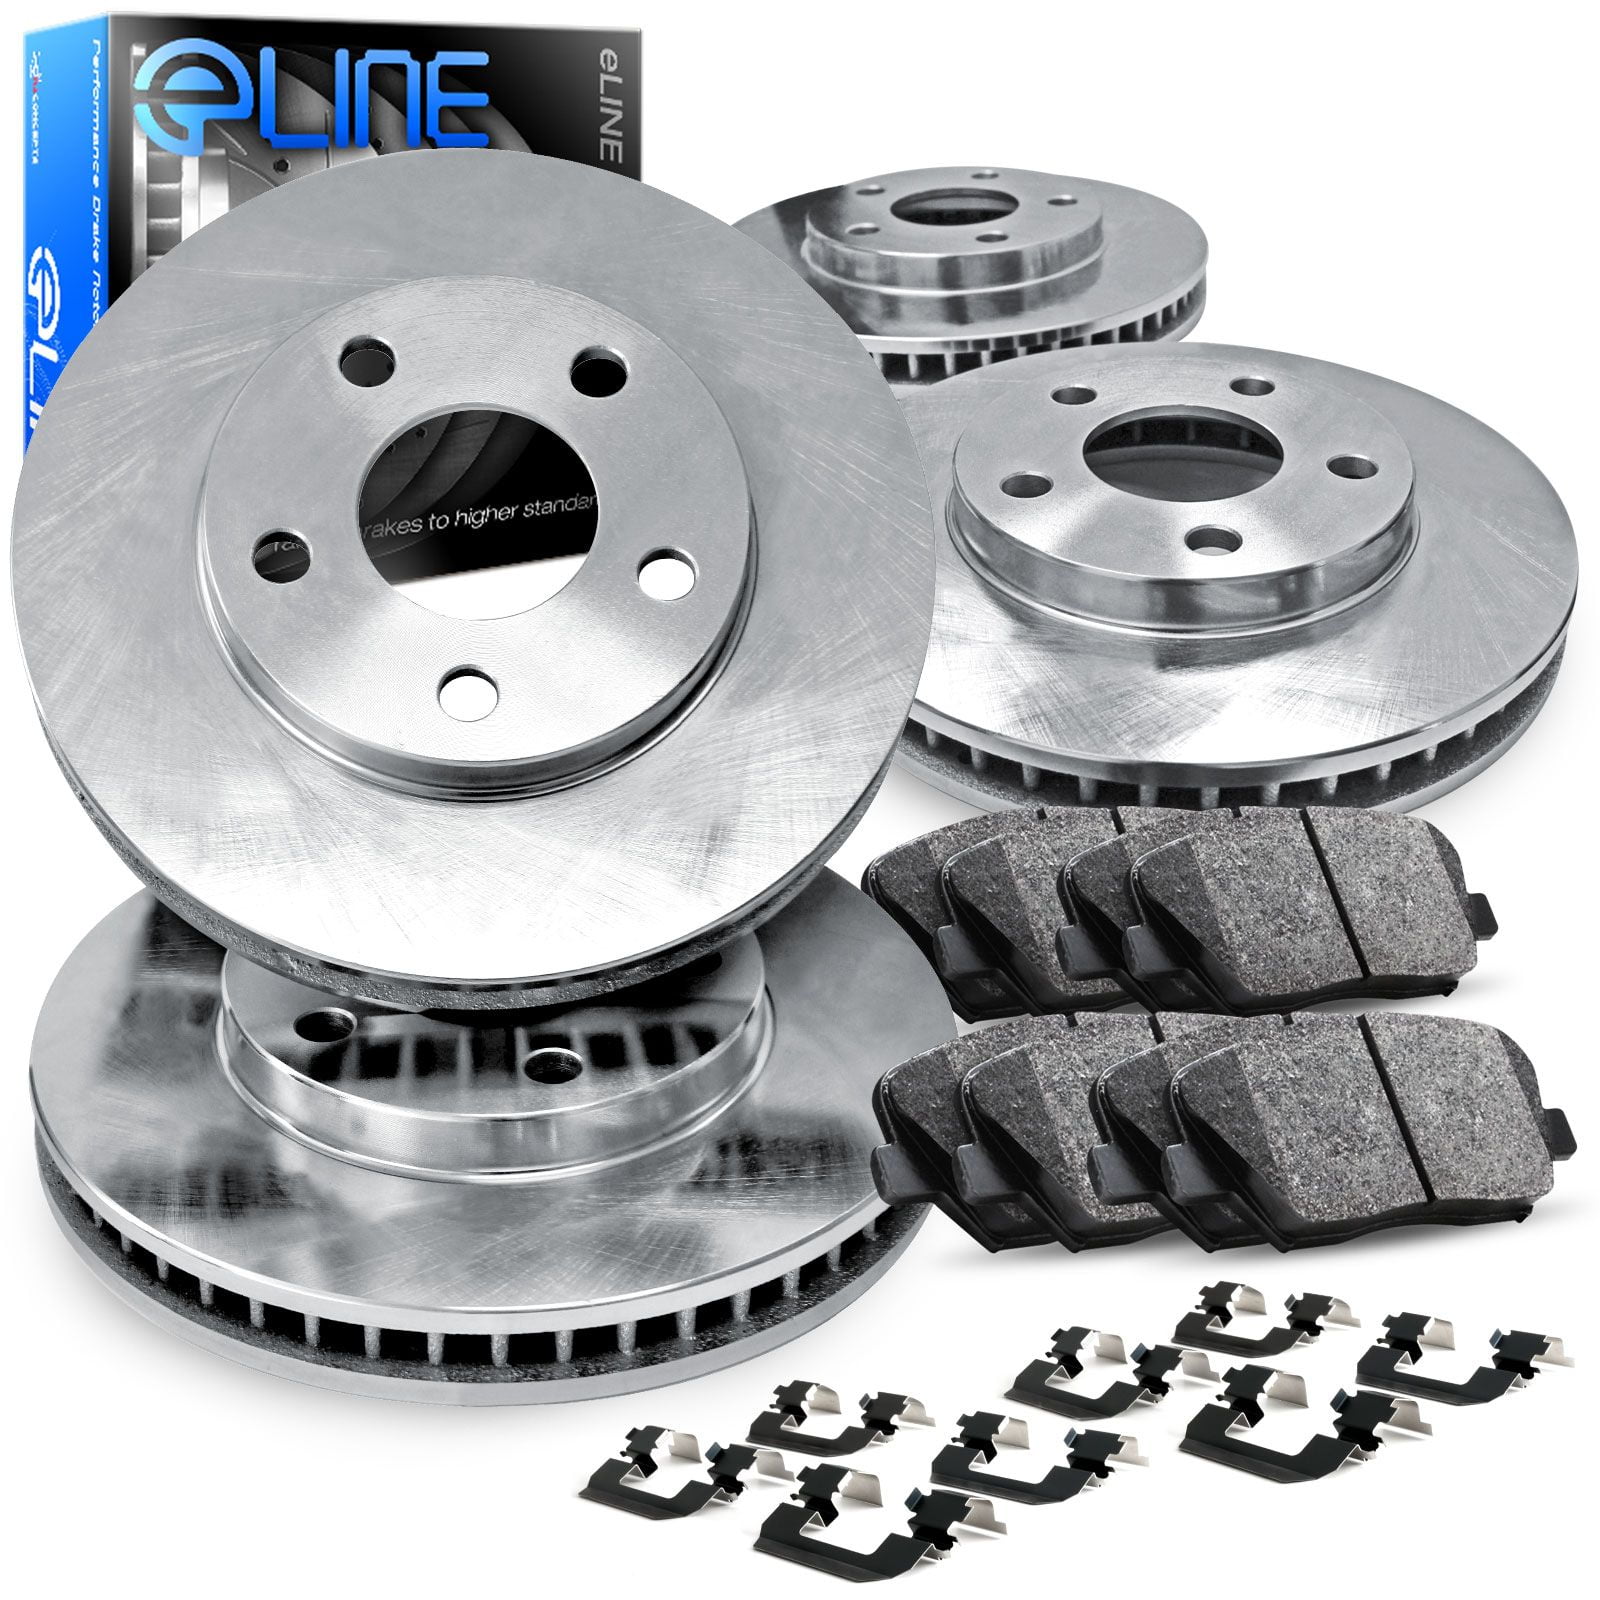 FRONT POWER CROSS DRILLED SLOTTED PLATED BRAKE ROTORS CERAMIC PADS 56702PK 